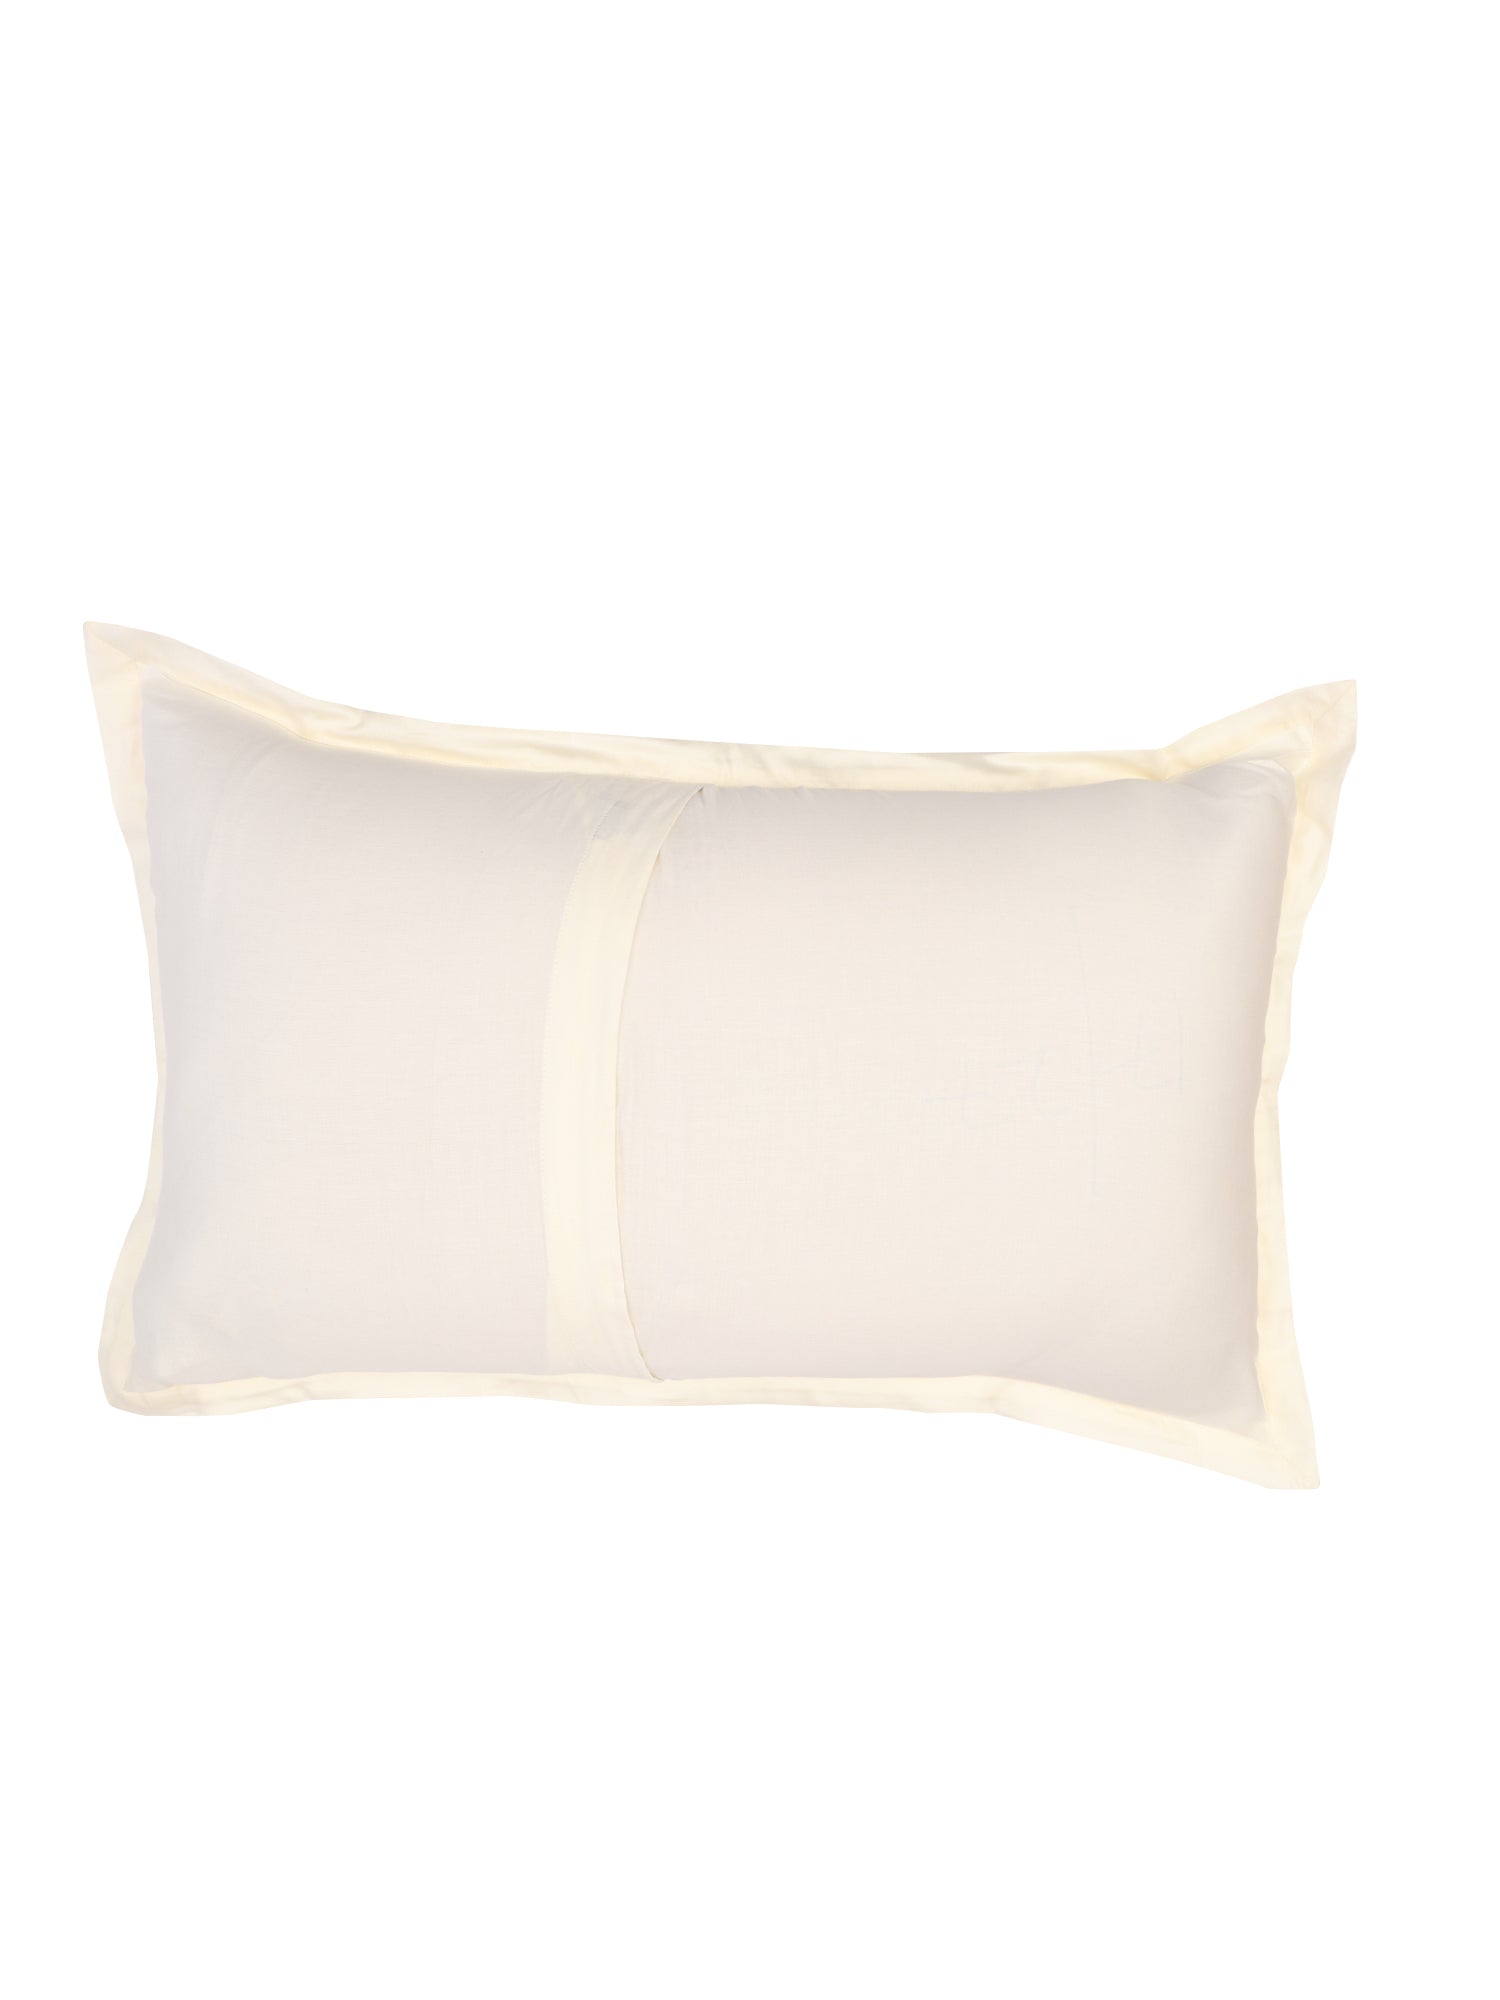 back side of offwhite colored embroidered pillow sham 